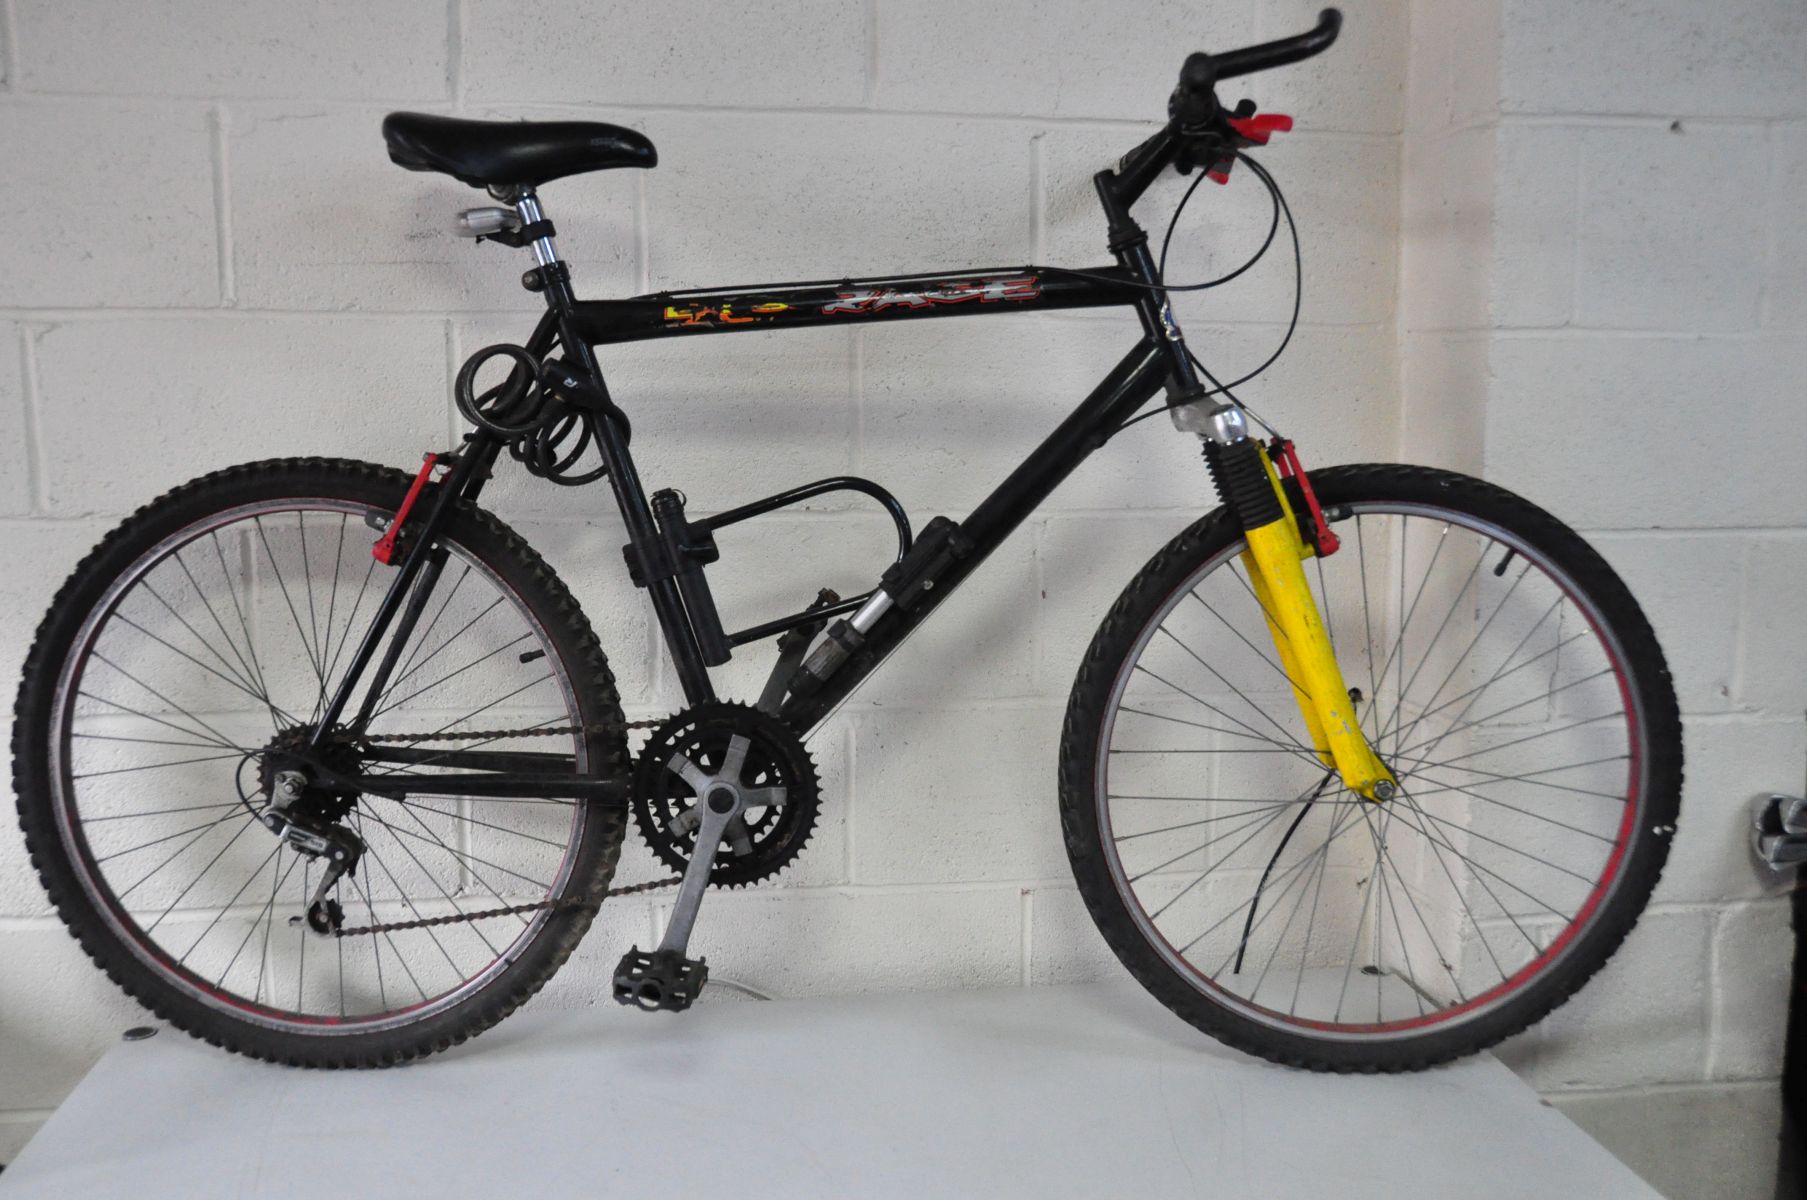 A FALCON GENTS MOUNTAIN BIKE with a 23 ins frame 18 speed Shimano gears, front suspension